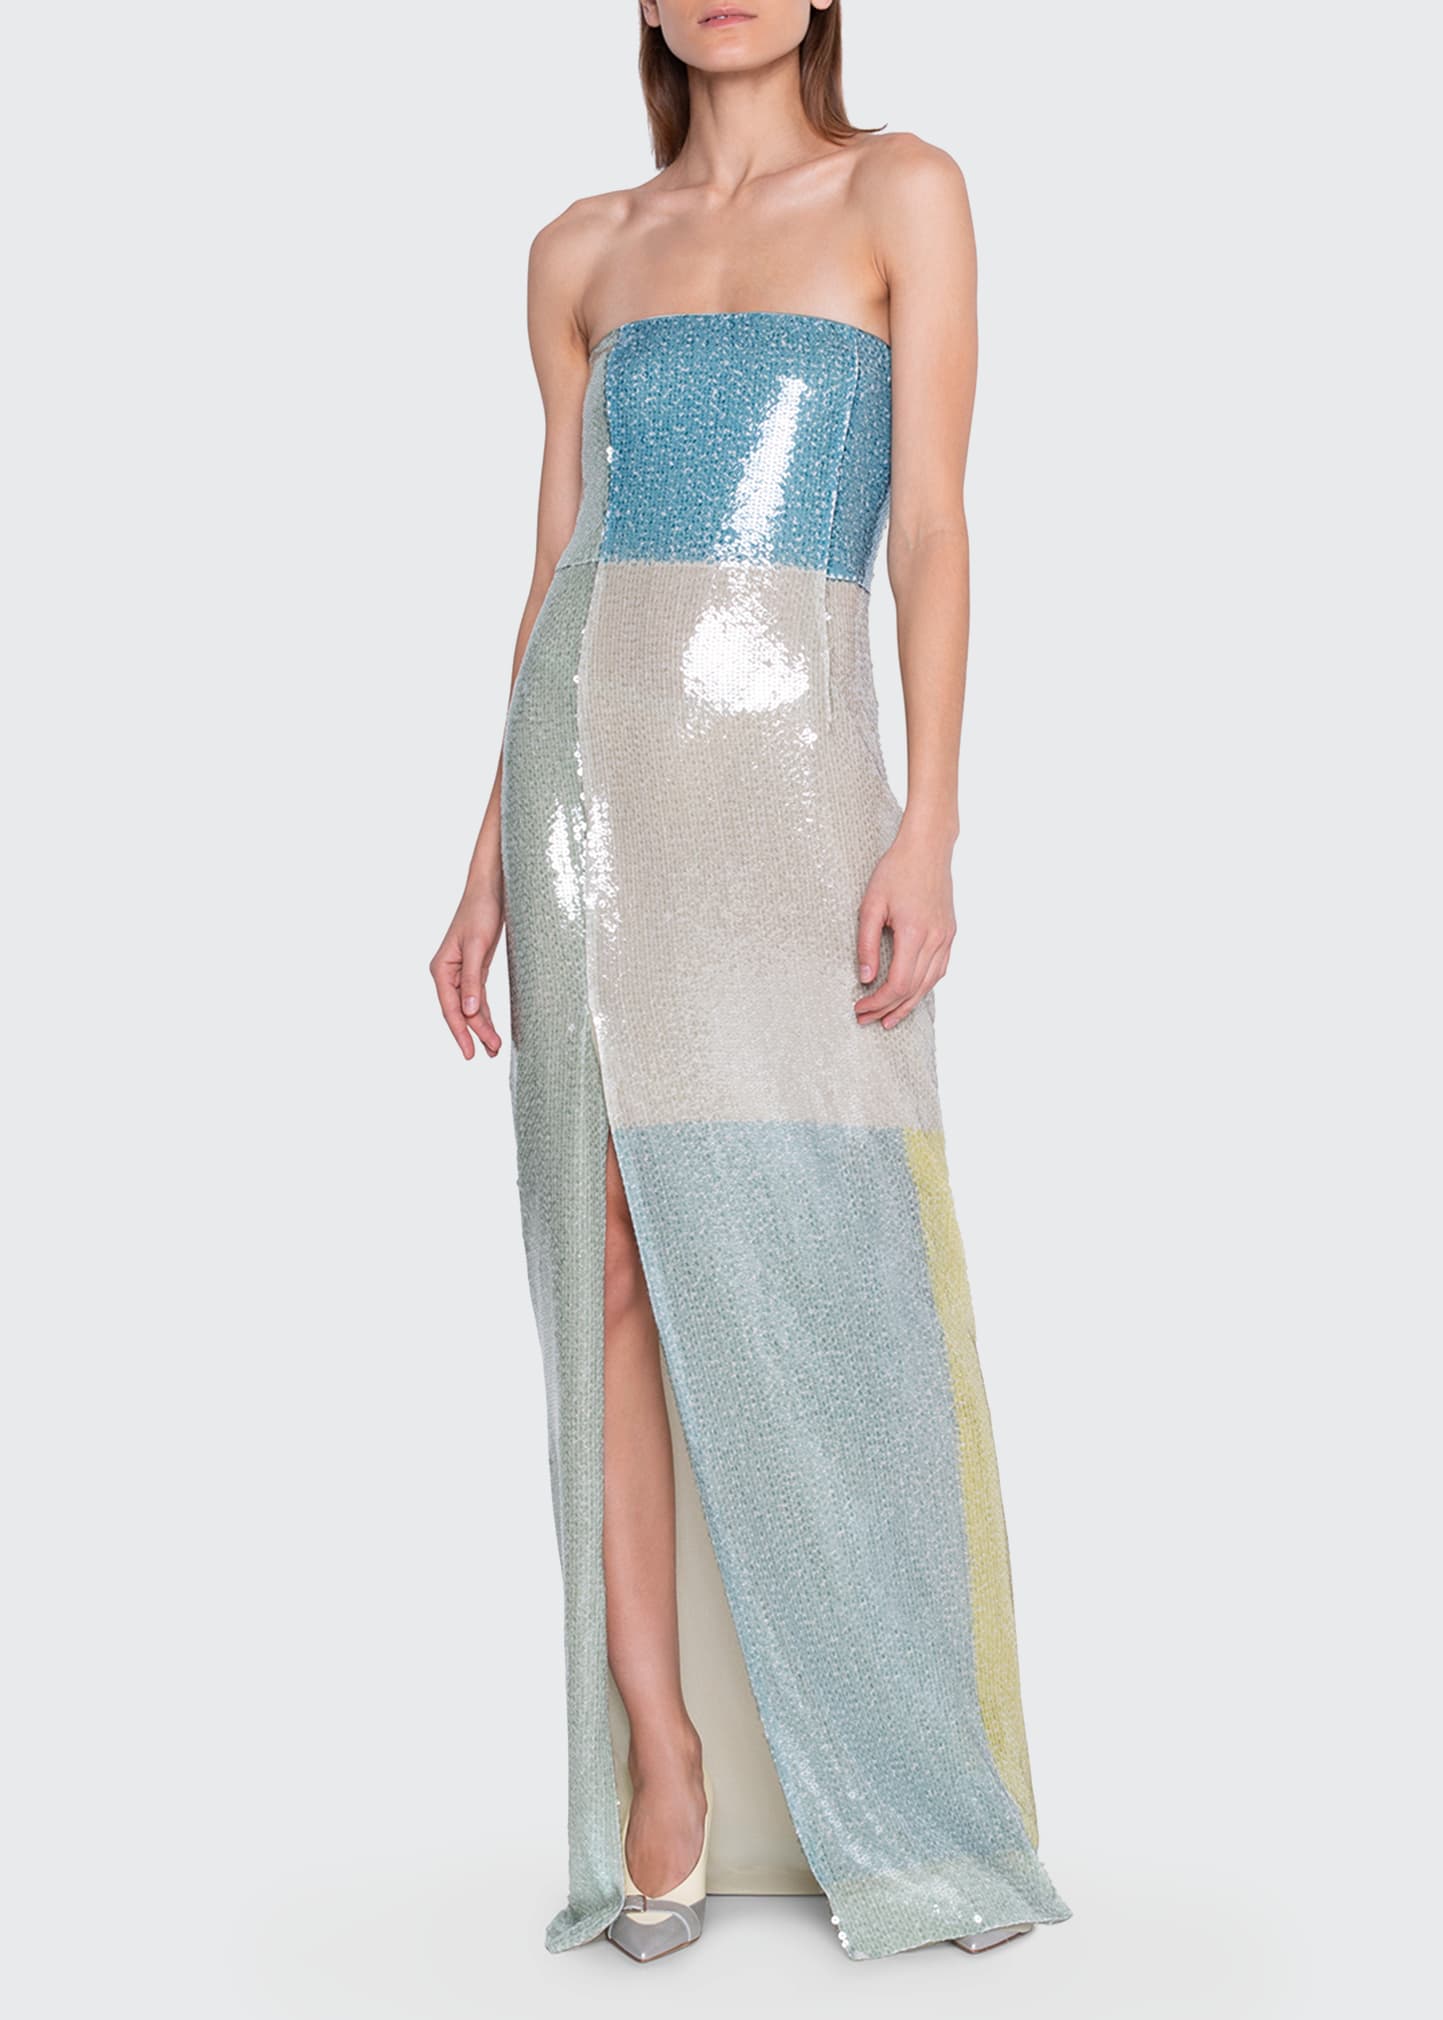 Sequin-Colorblocked Strapless Gown